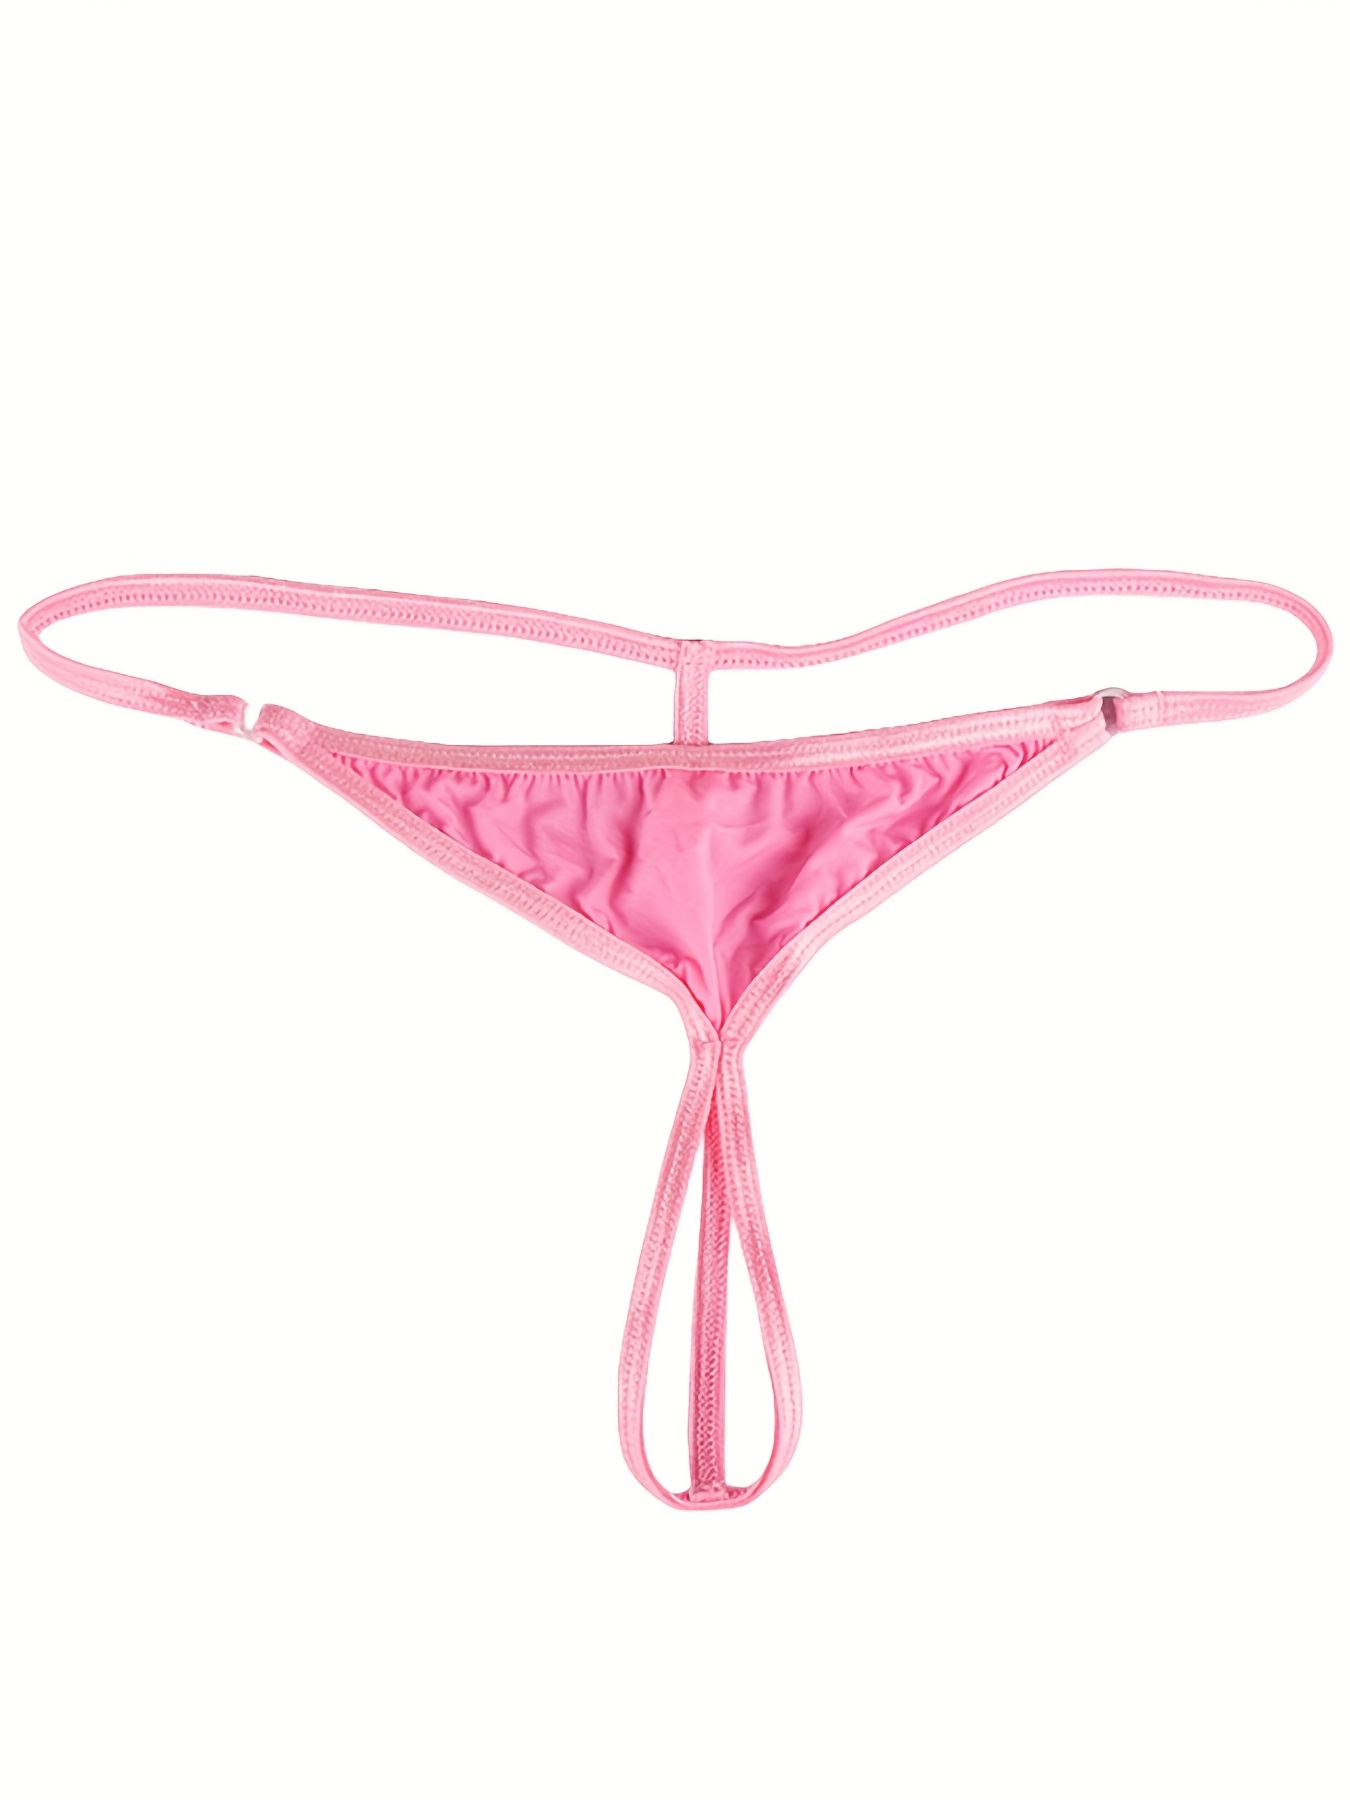 Men's Seamless Underwear Invisible No Show Thong PU809 (Pink